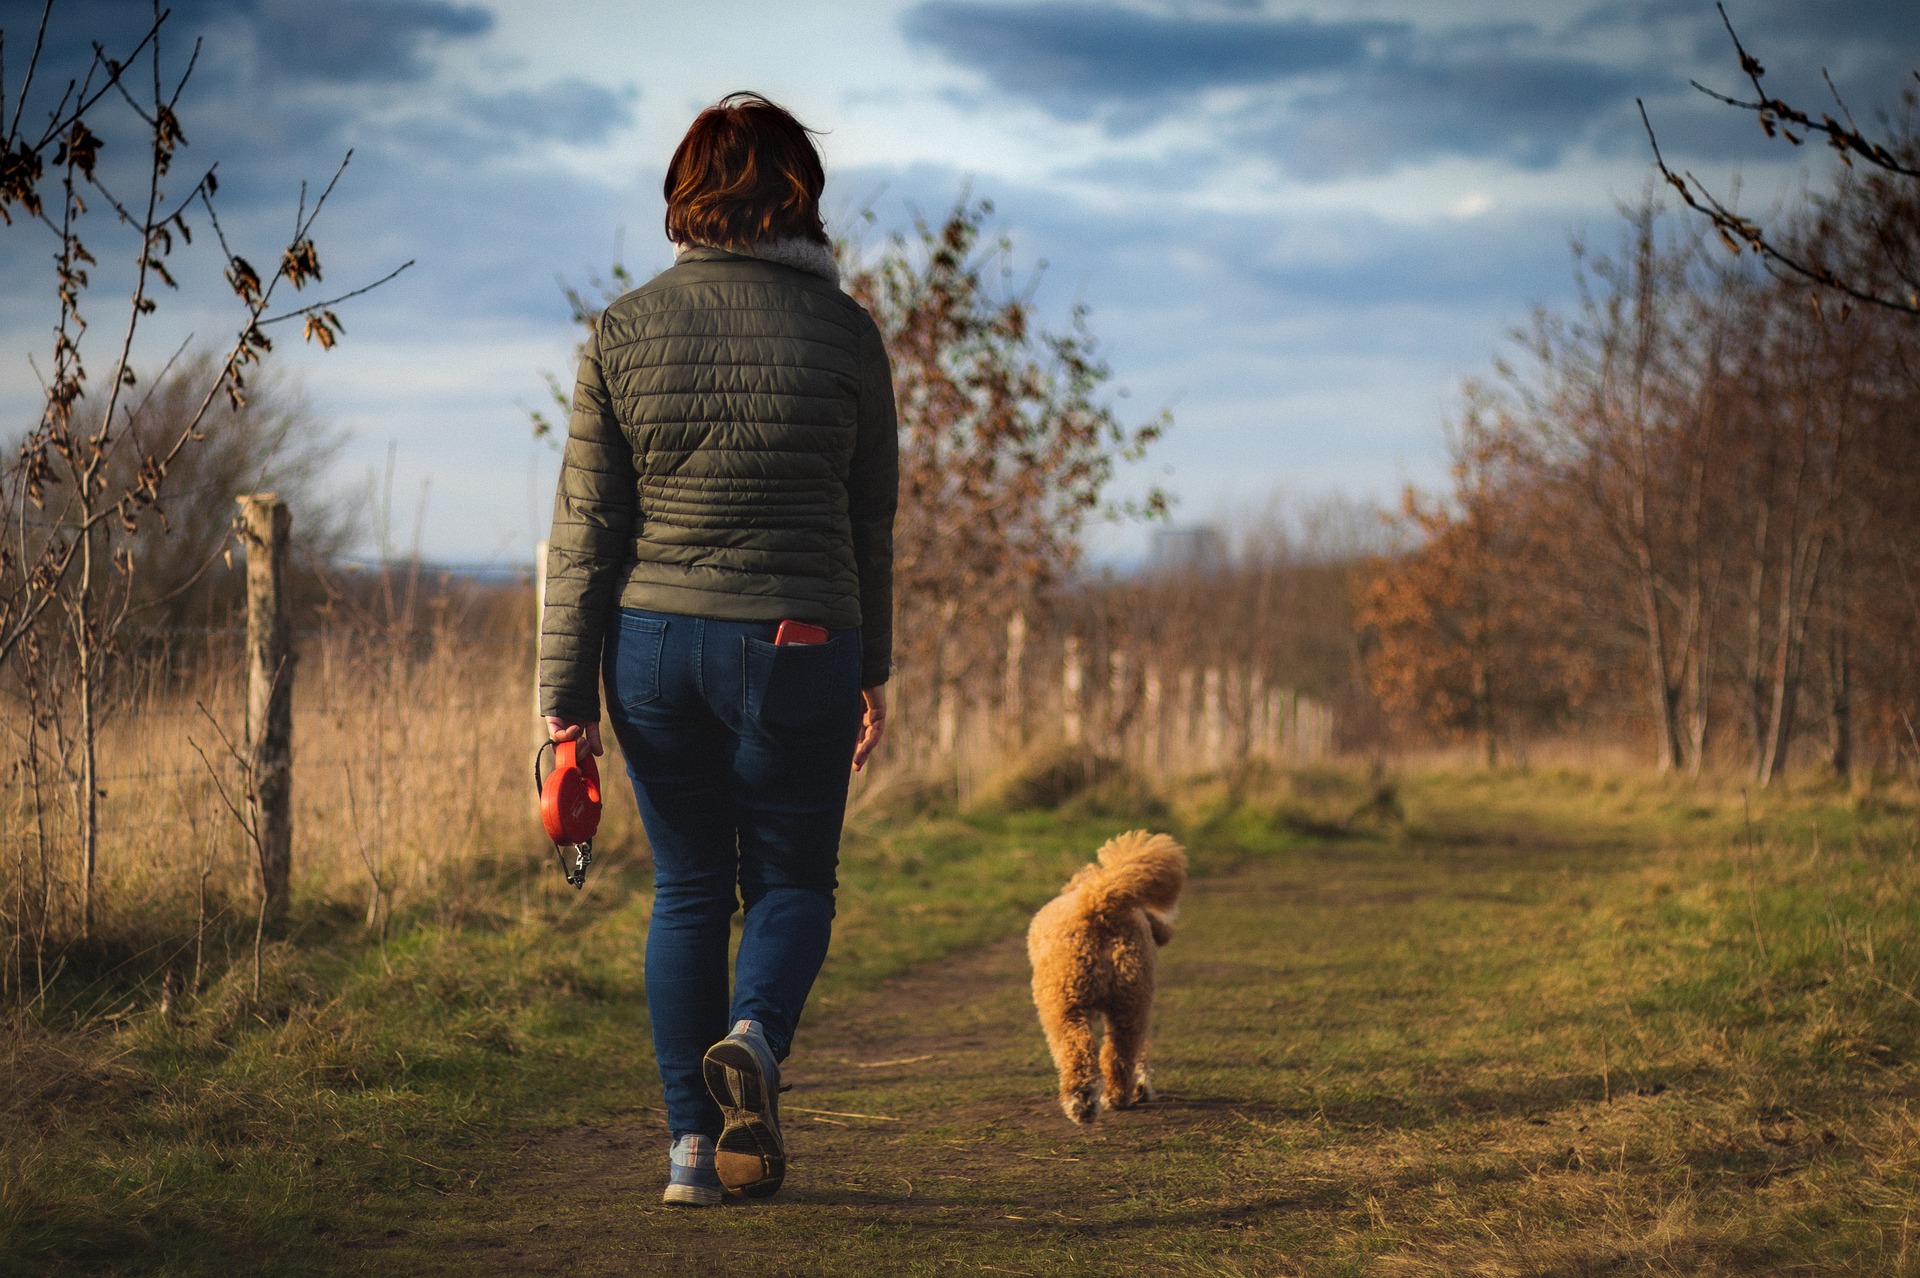 A Dog Is Walking In The Field With Its Owner.